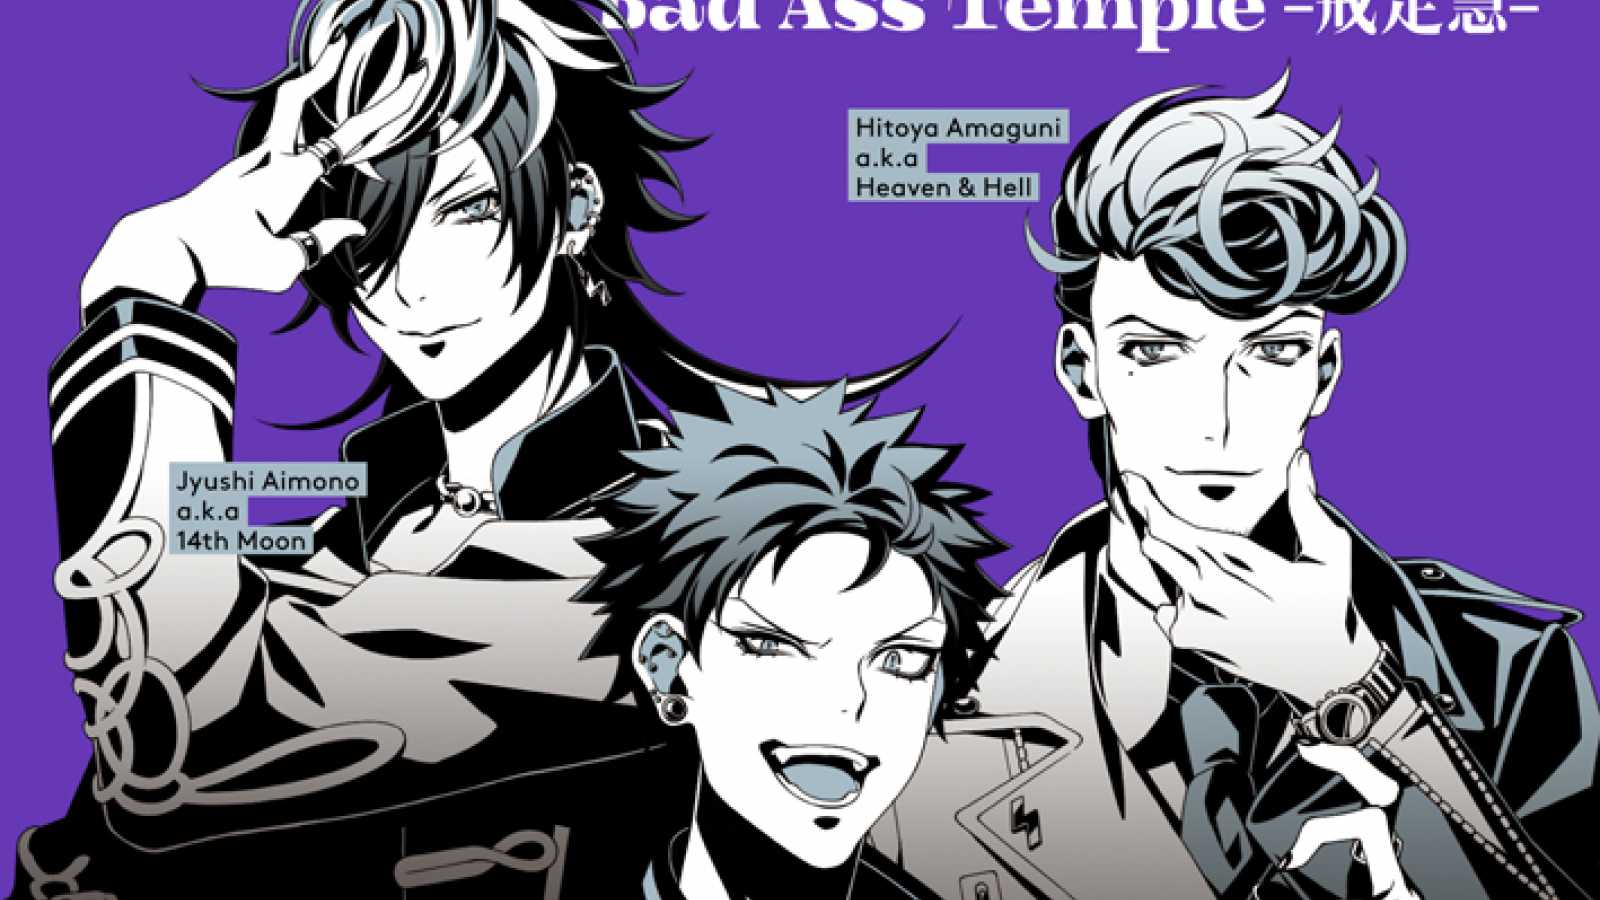 New Single from Bad Ass Temple © Hypnosis Mic. All rights reserved.